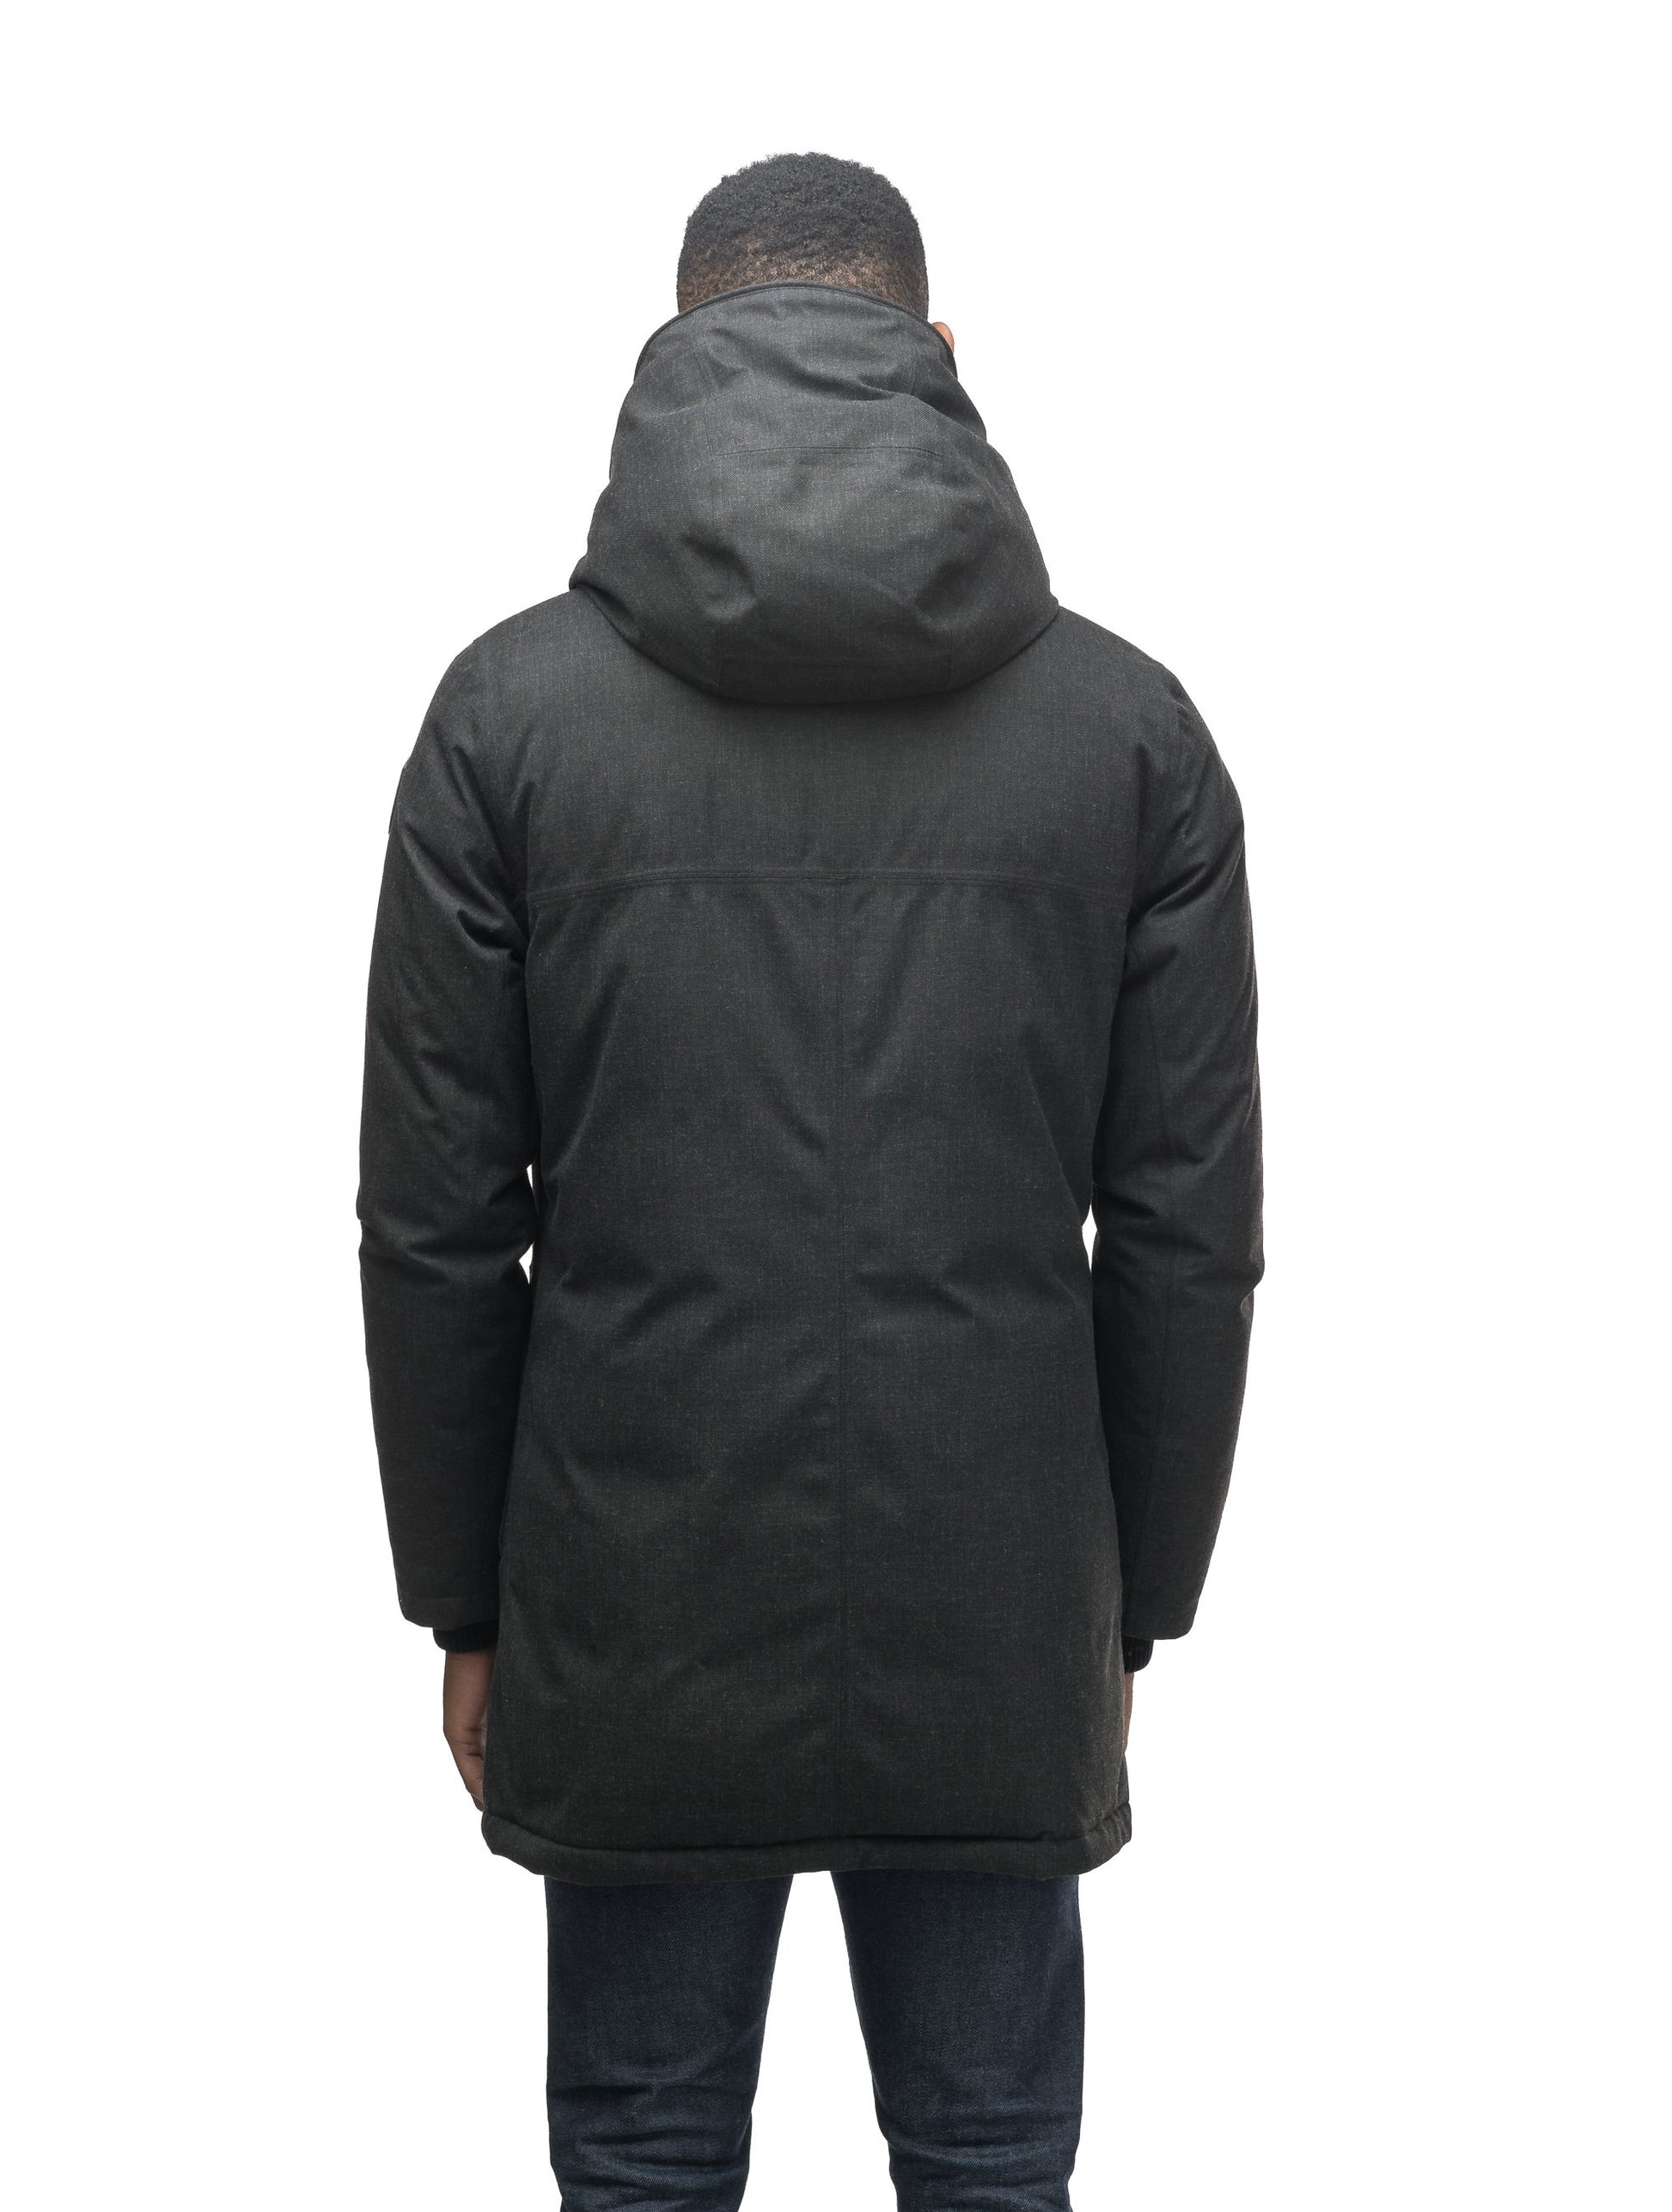 Men's fur free hooded parka with zipper and button closure placket featuring two oversized front pockets in H. Black